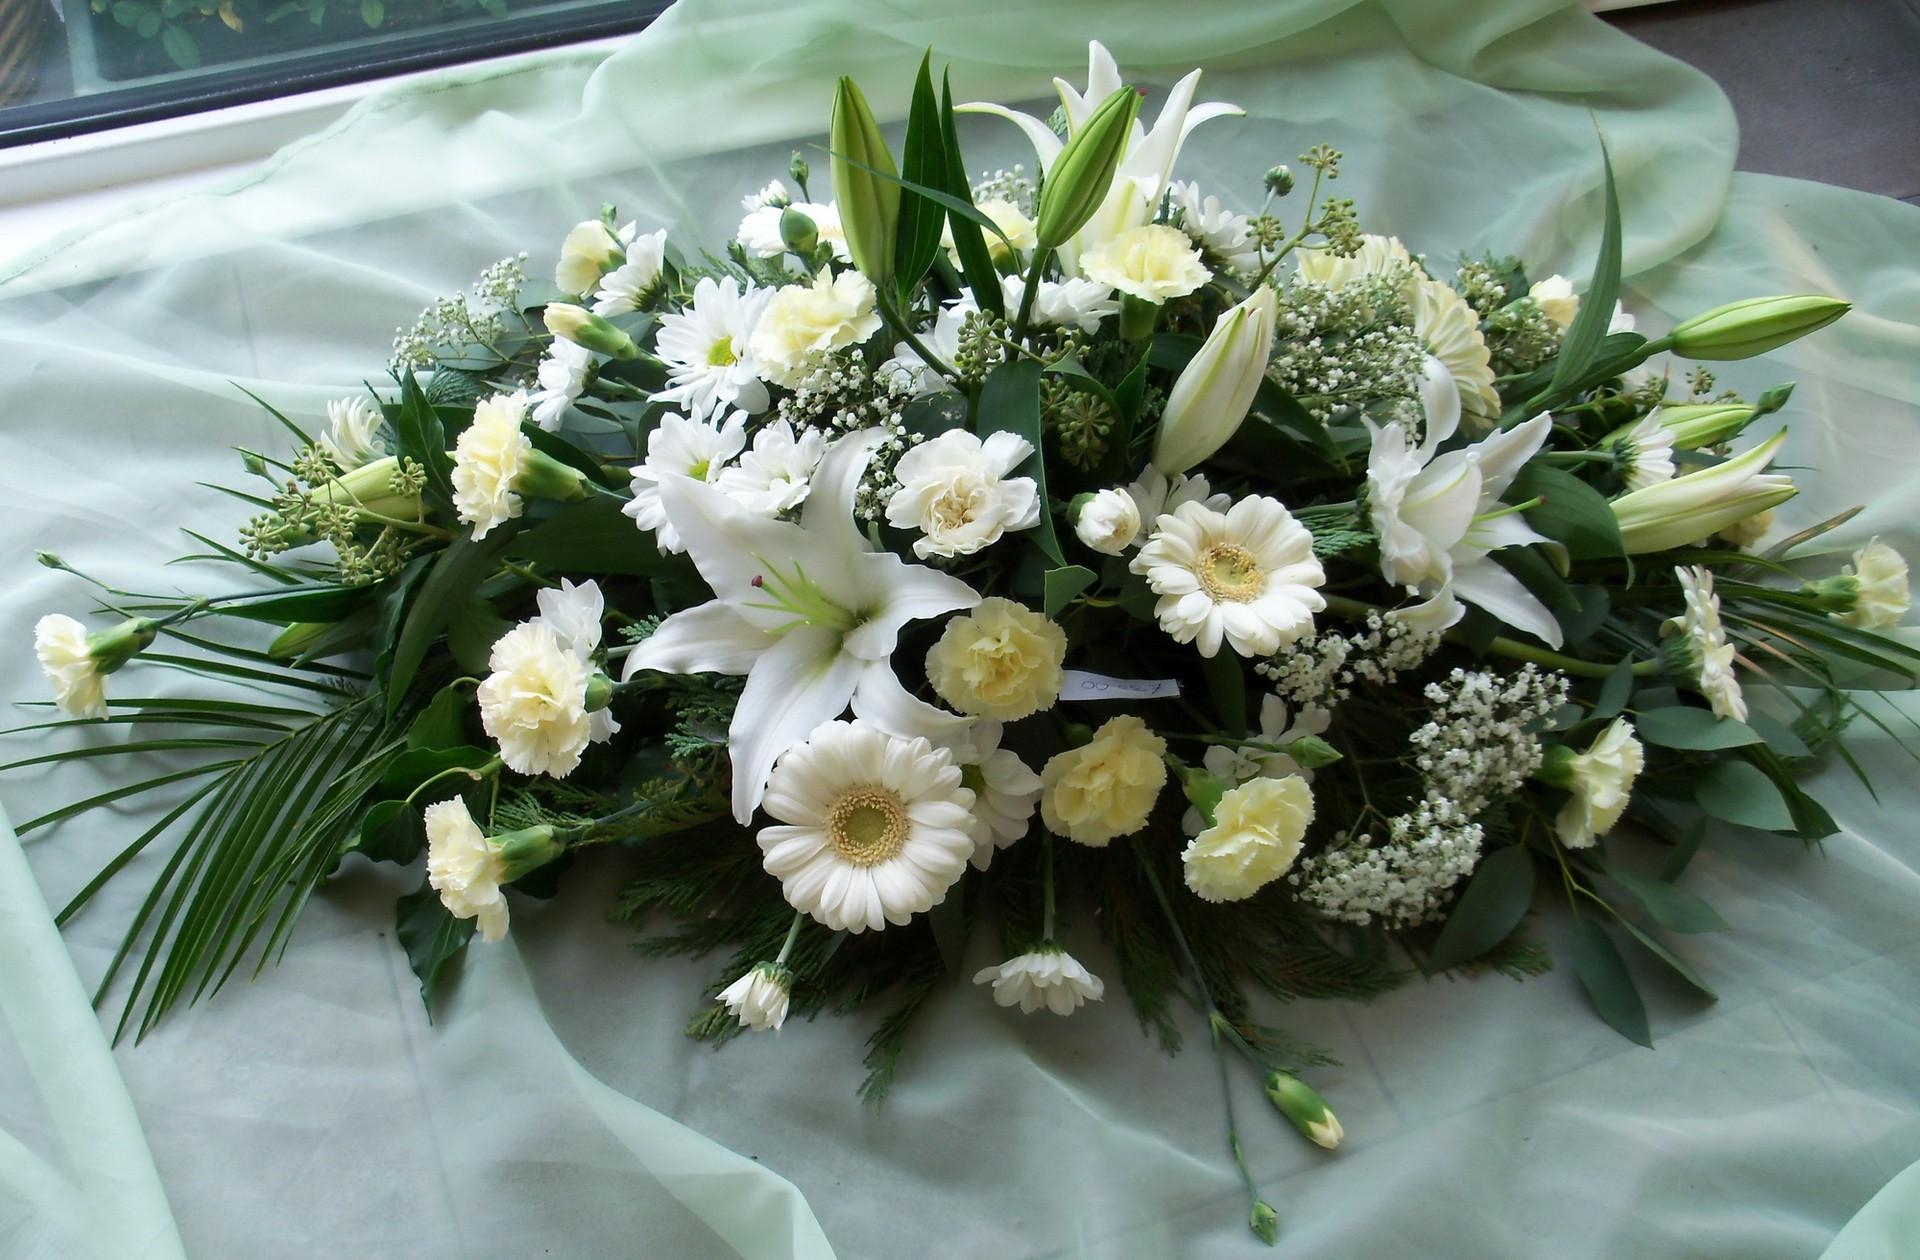 flowers, lilies, carnations, gerberas, gypsophilus, gipsophile, composition, handsomely, it's beautiful